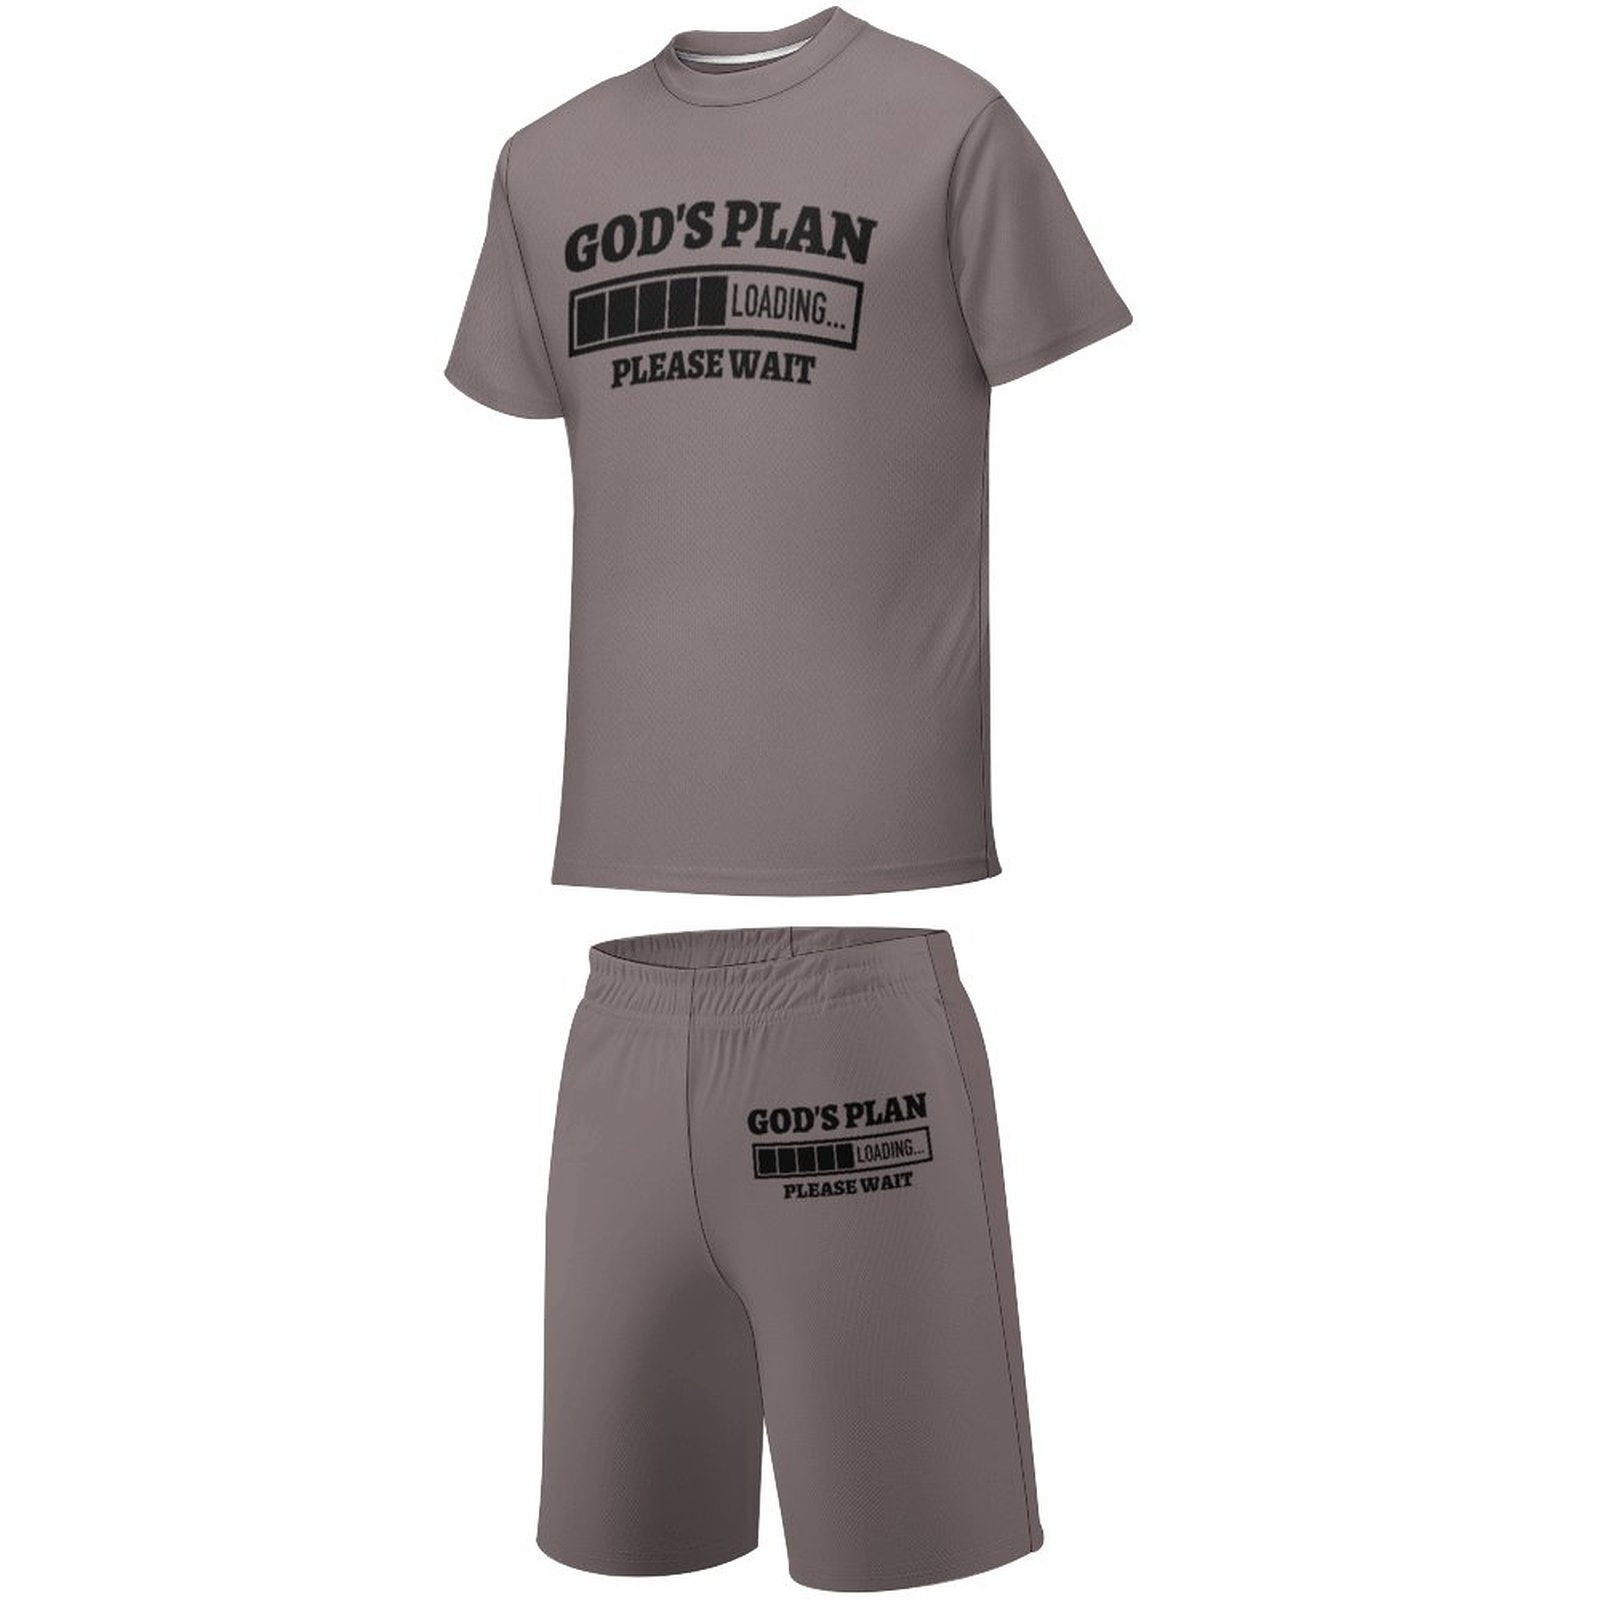 God's Plan Loading Youth Christian Summer Casual Outfit Shorts Set SALE-Personal Design